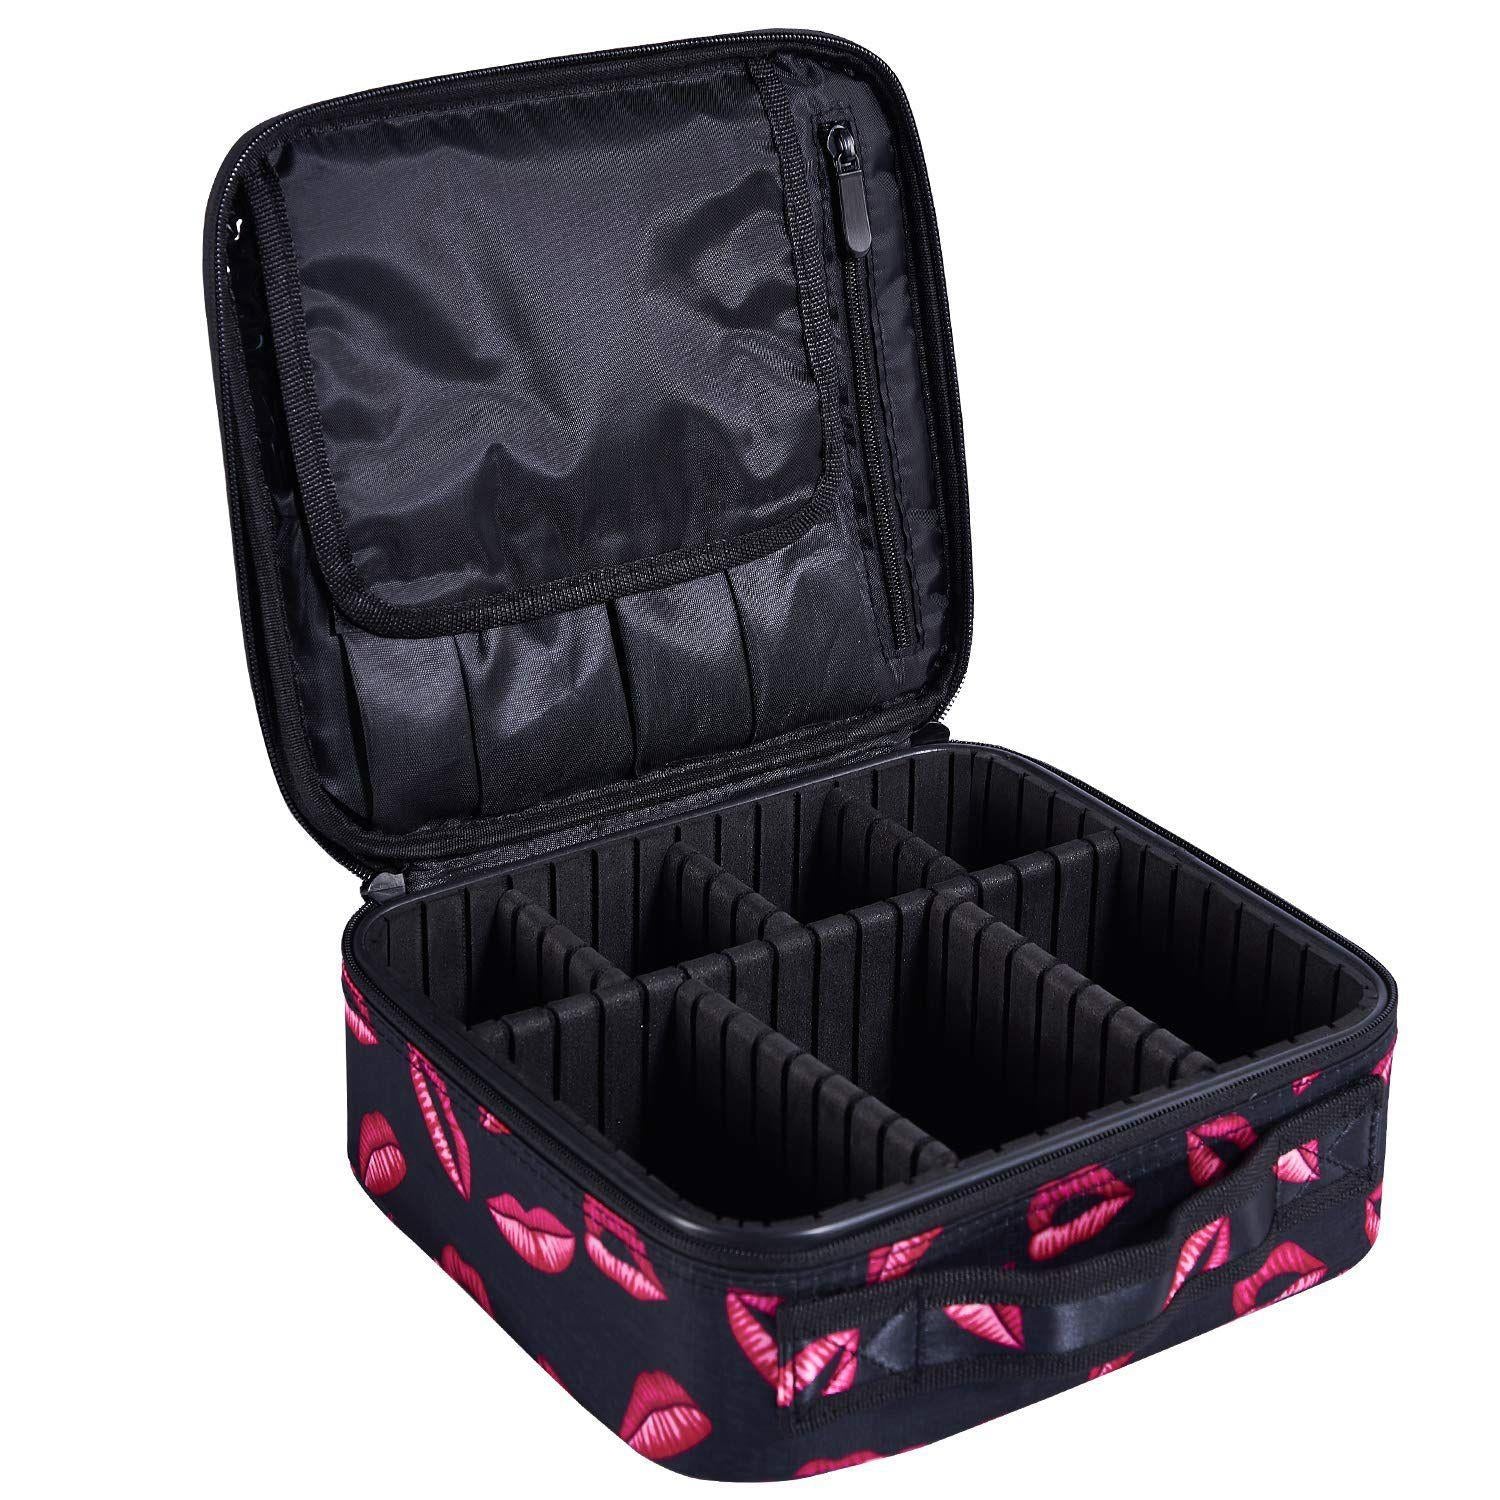 Portable Travel Makeup Train Case Cosmetic Bag Organizer with Adjustable Compartment Brush Holder - ebowsos